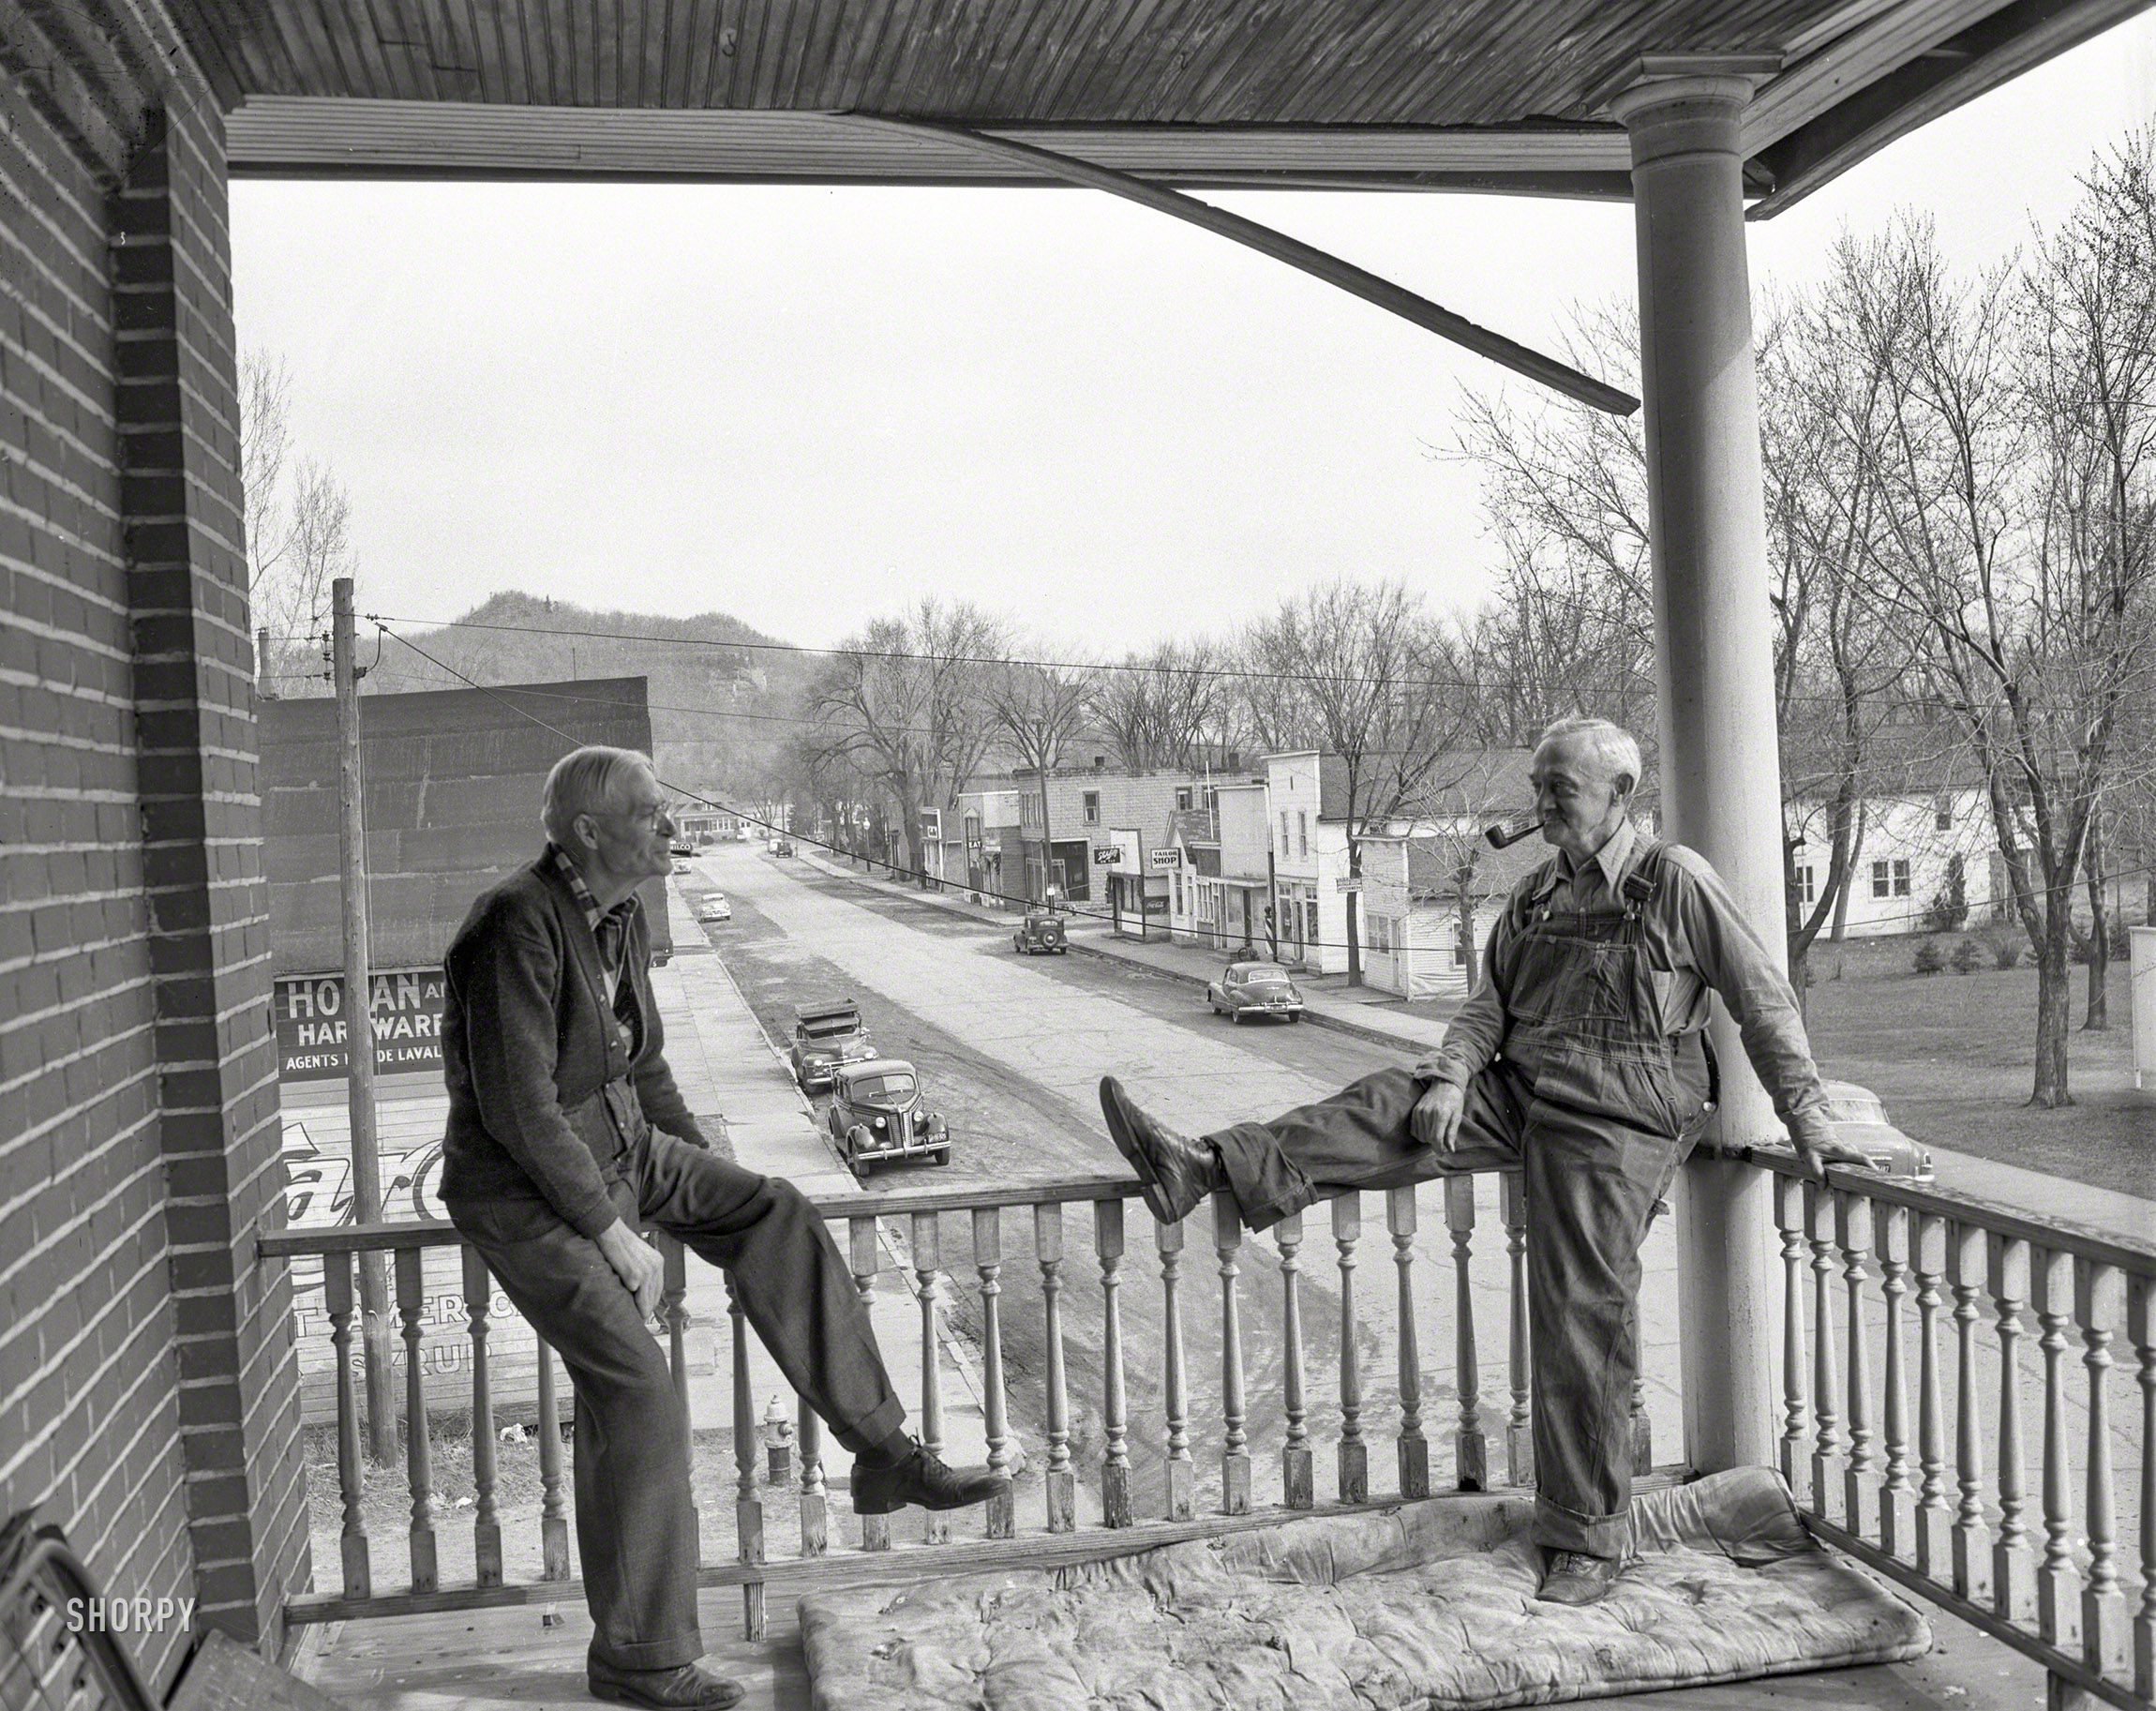 &nbsp; &nbsp; &nbsp; &nbsp; UPDATE: Main Street in Friendship, Wisconsin, at the Friendship Hotel, is the answer, supplied by "lifelong Wisconsin resident" Wiscojim. Clapclapclap!
Who can tell us where these old-timers are, other than on a porch near a mountain? 4x5 negative from the News Archive. View full size.